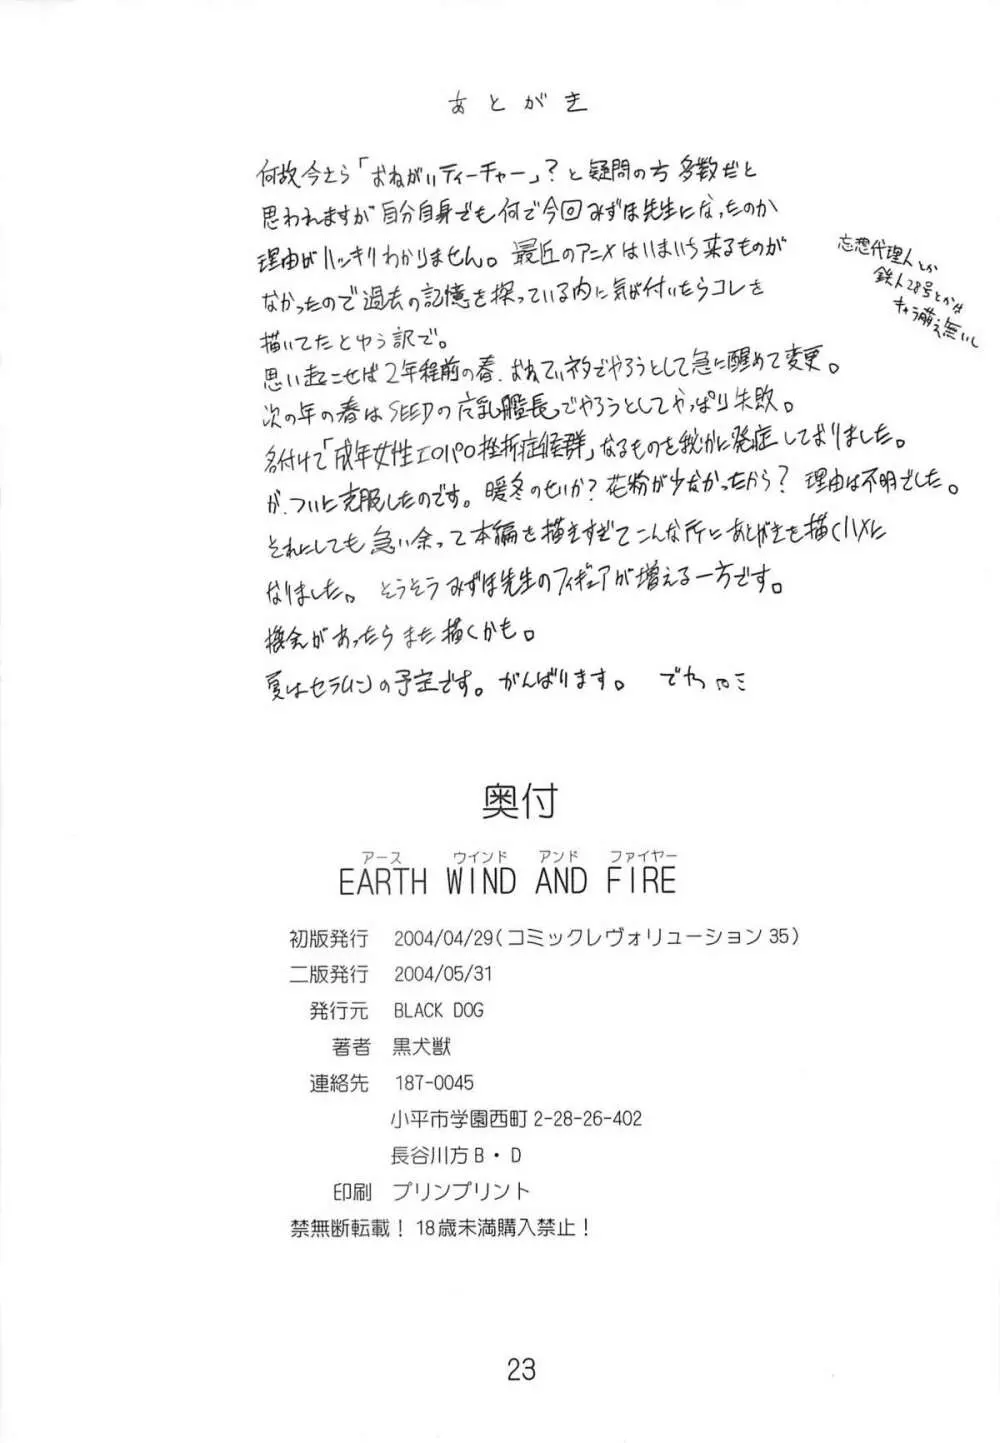 EARTH WIND AND FIRE 22ページ